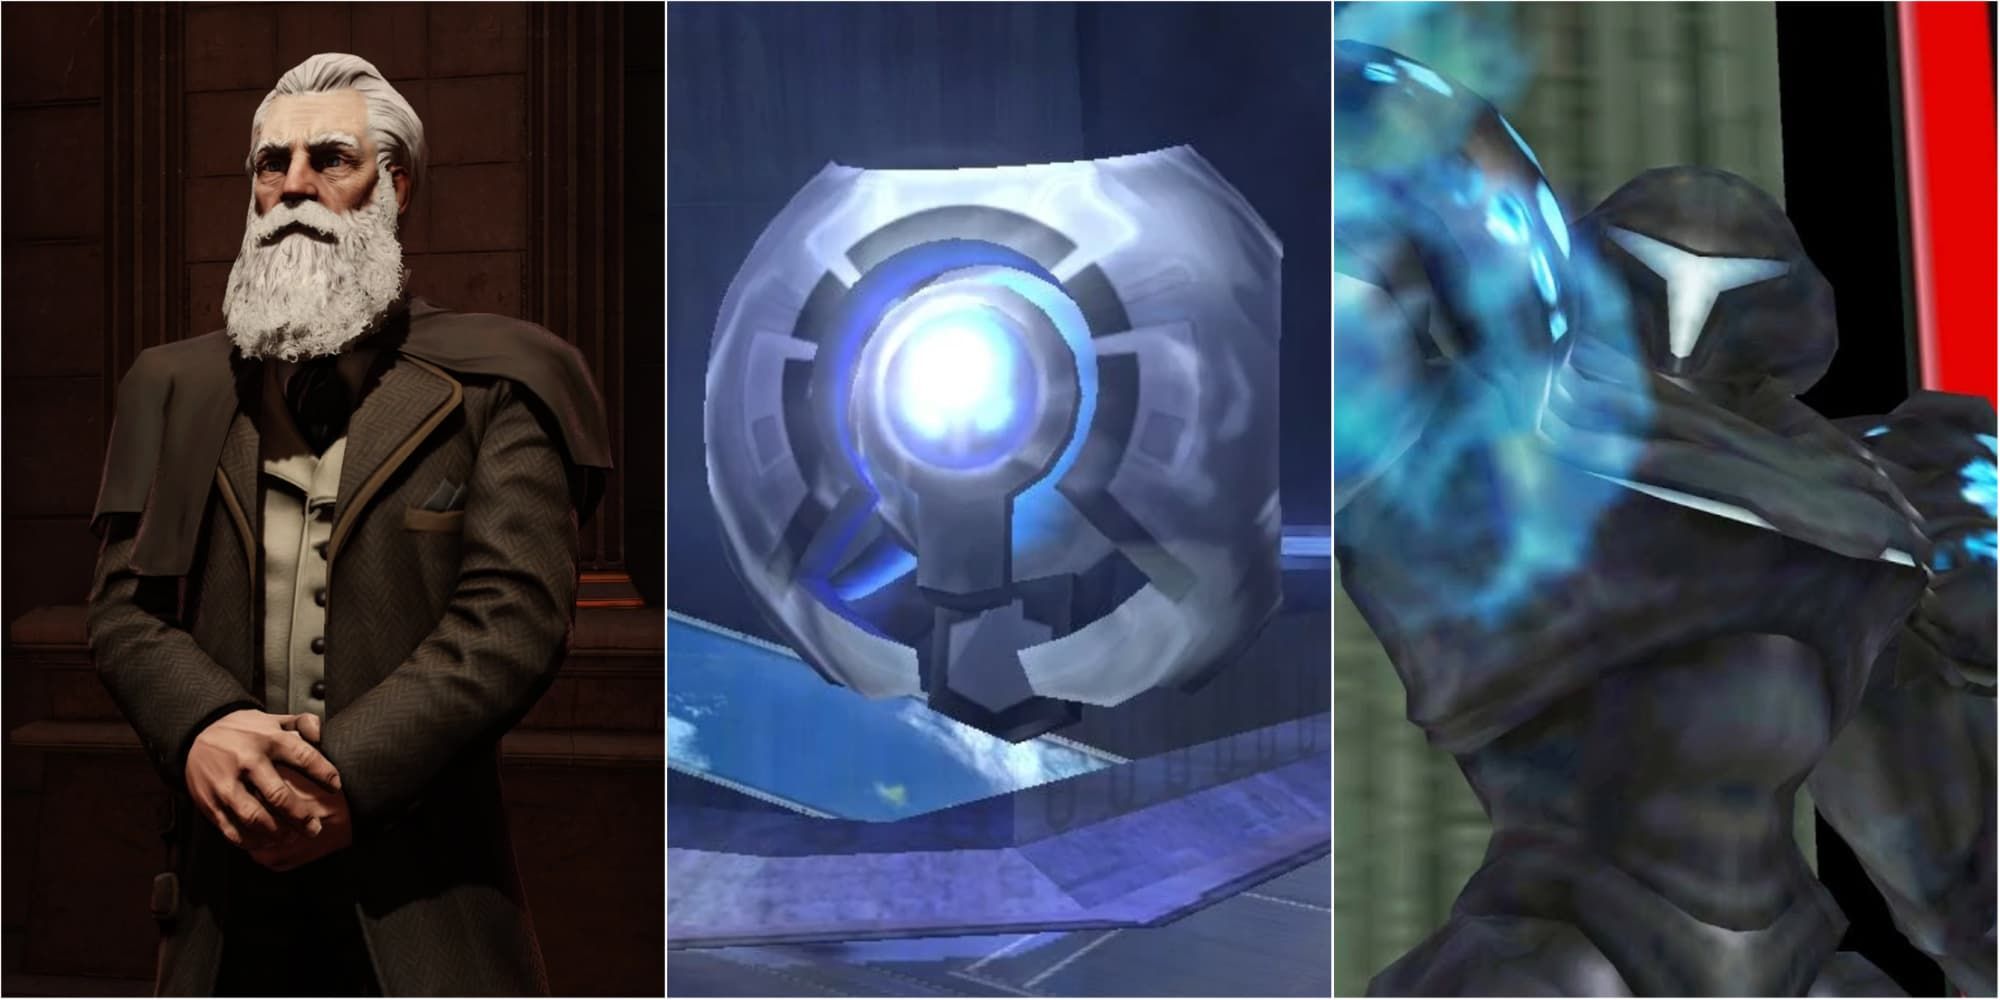 Father Comstock, 343 Guilty Spark, and Dark Samus.